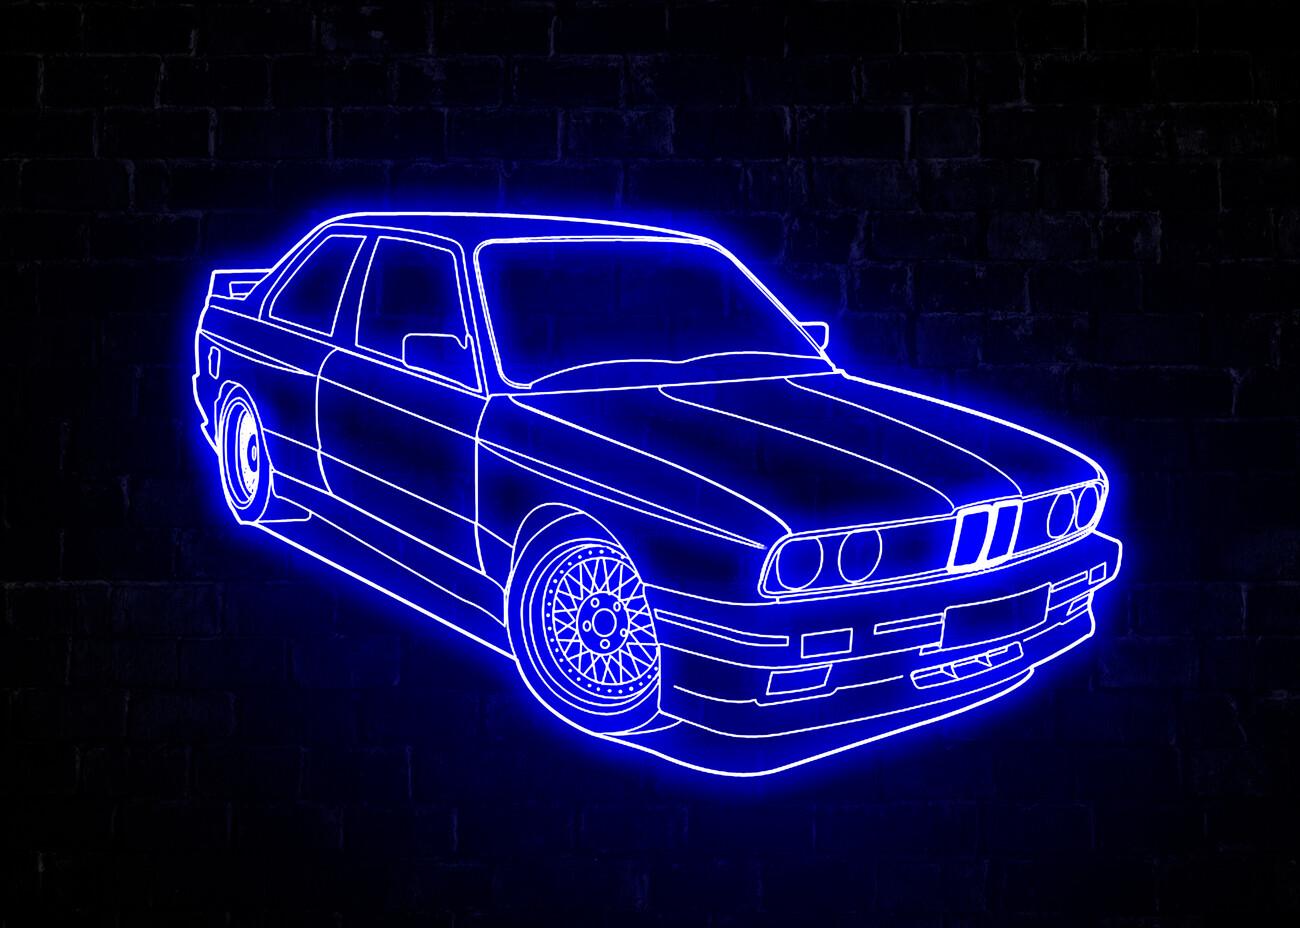 E36 Oldtimer Car Neon Wall Mural Buy online at Europosters